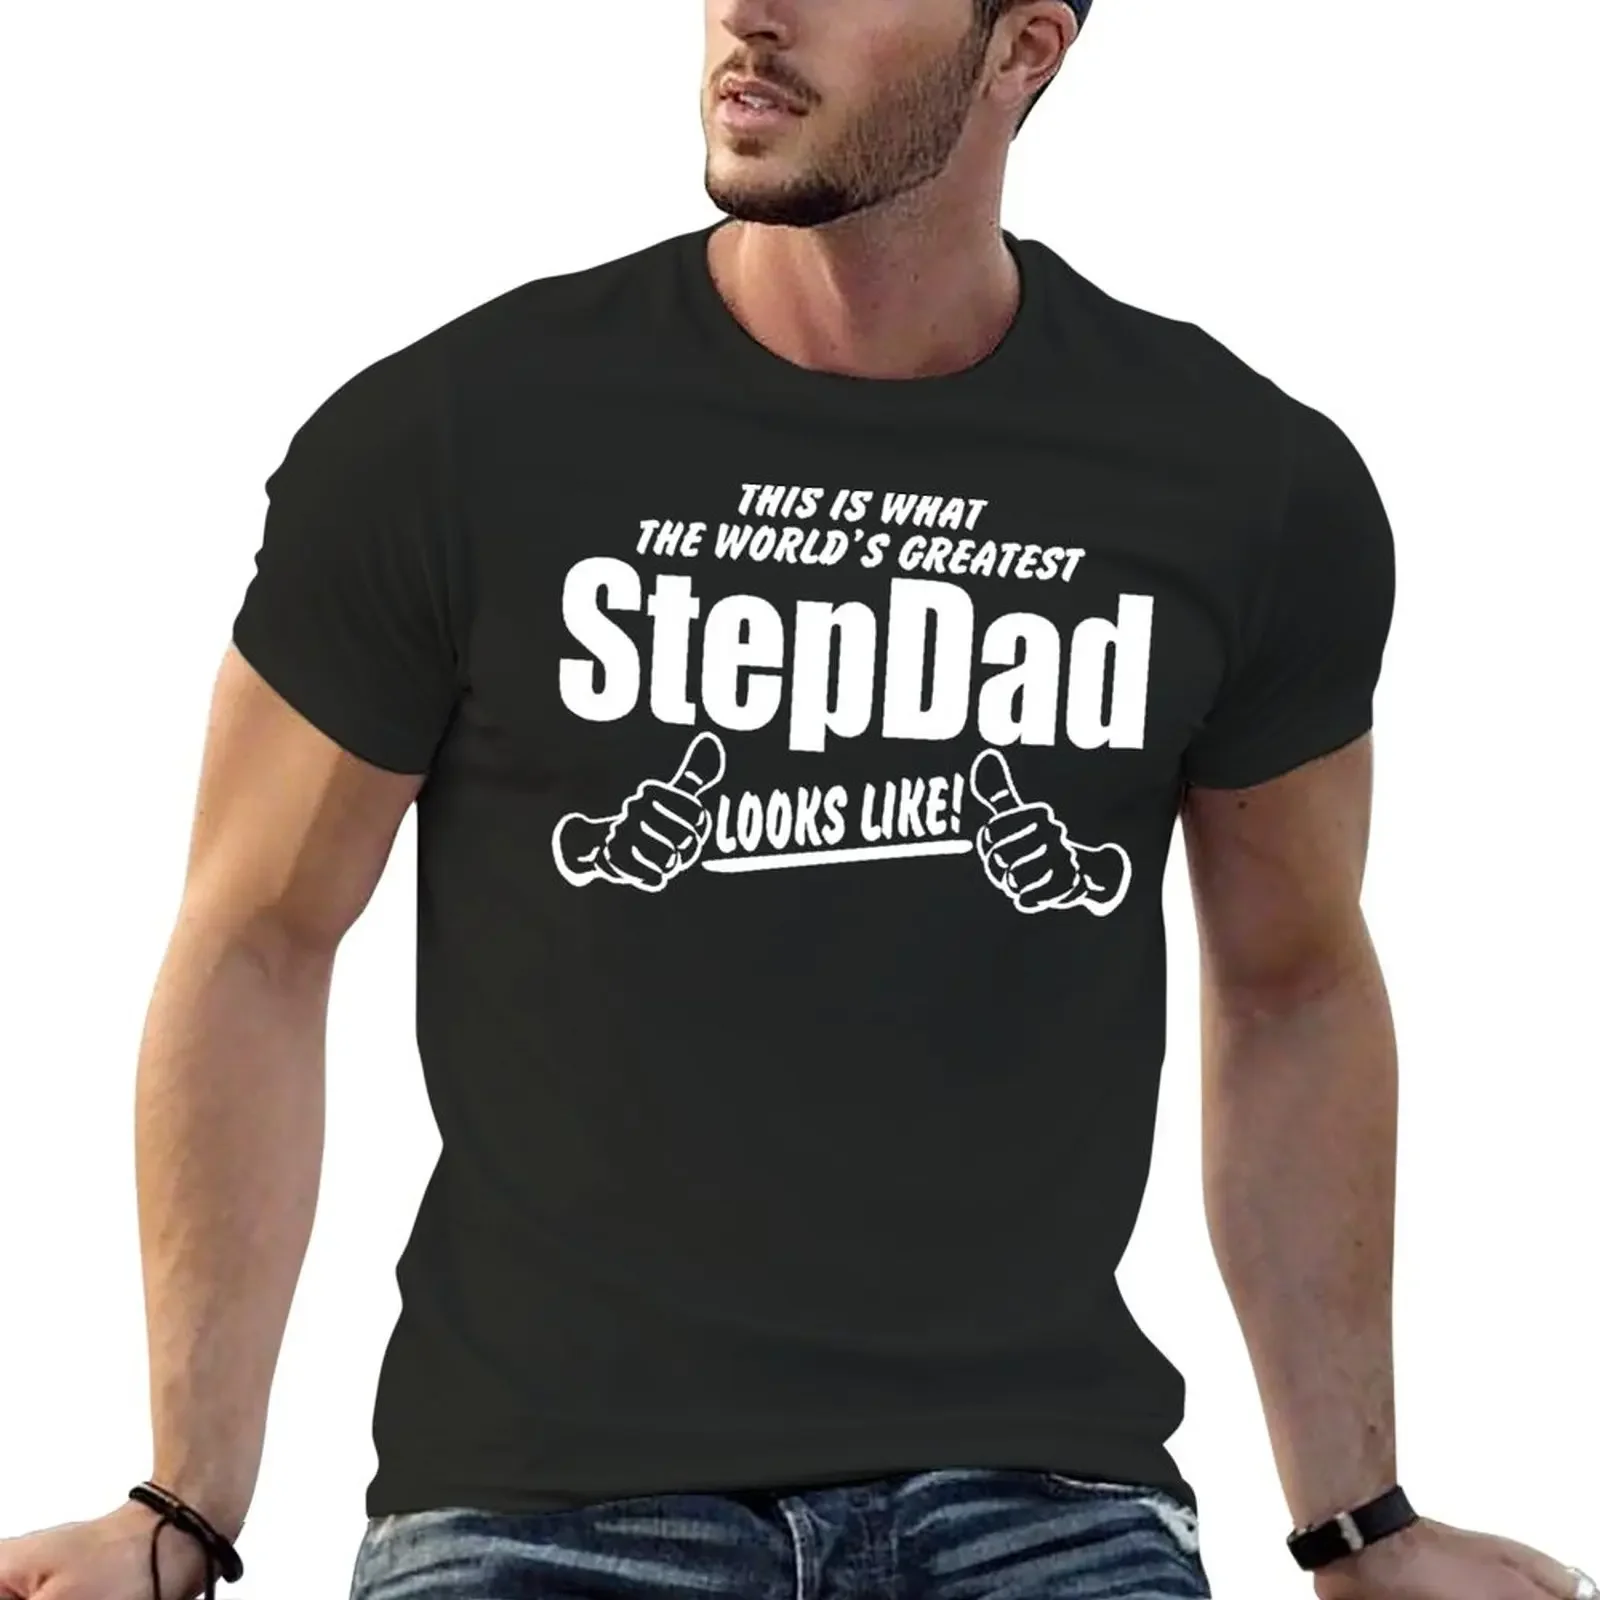 

THIS IS WHAT THE WORLDS GREATEST STEPDAD LOOKS LIKE T-Shirt customs plain mens t shirt